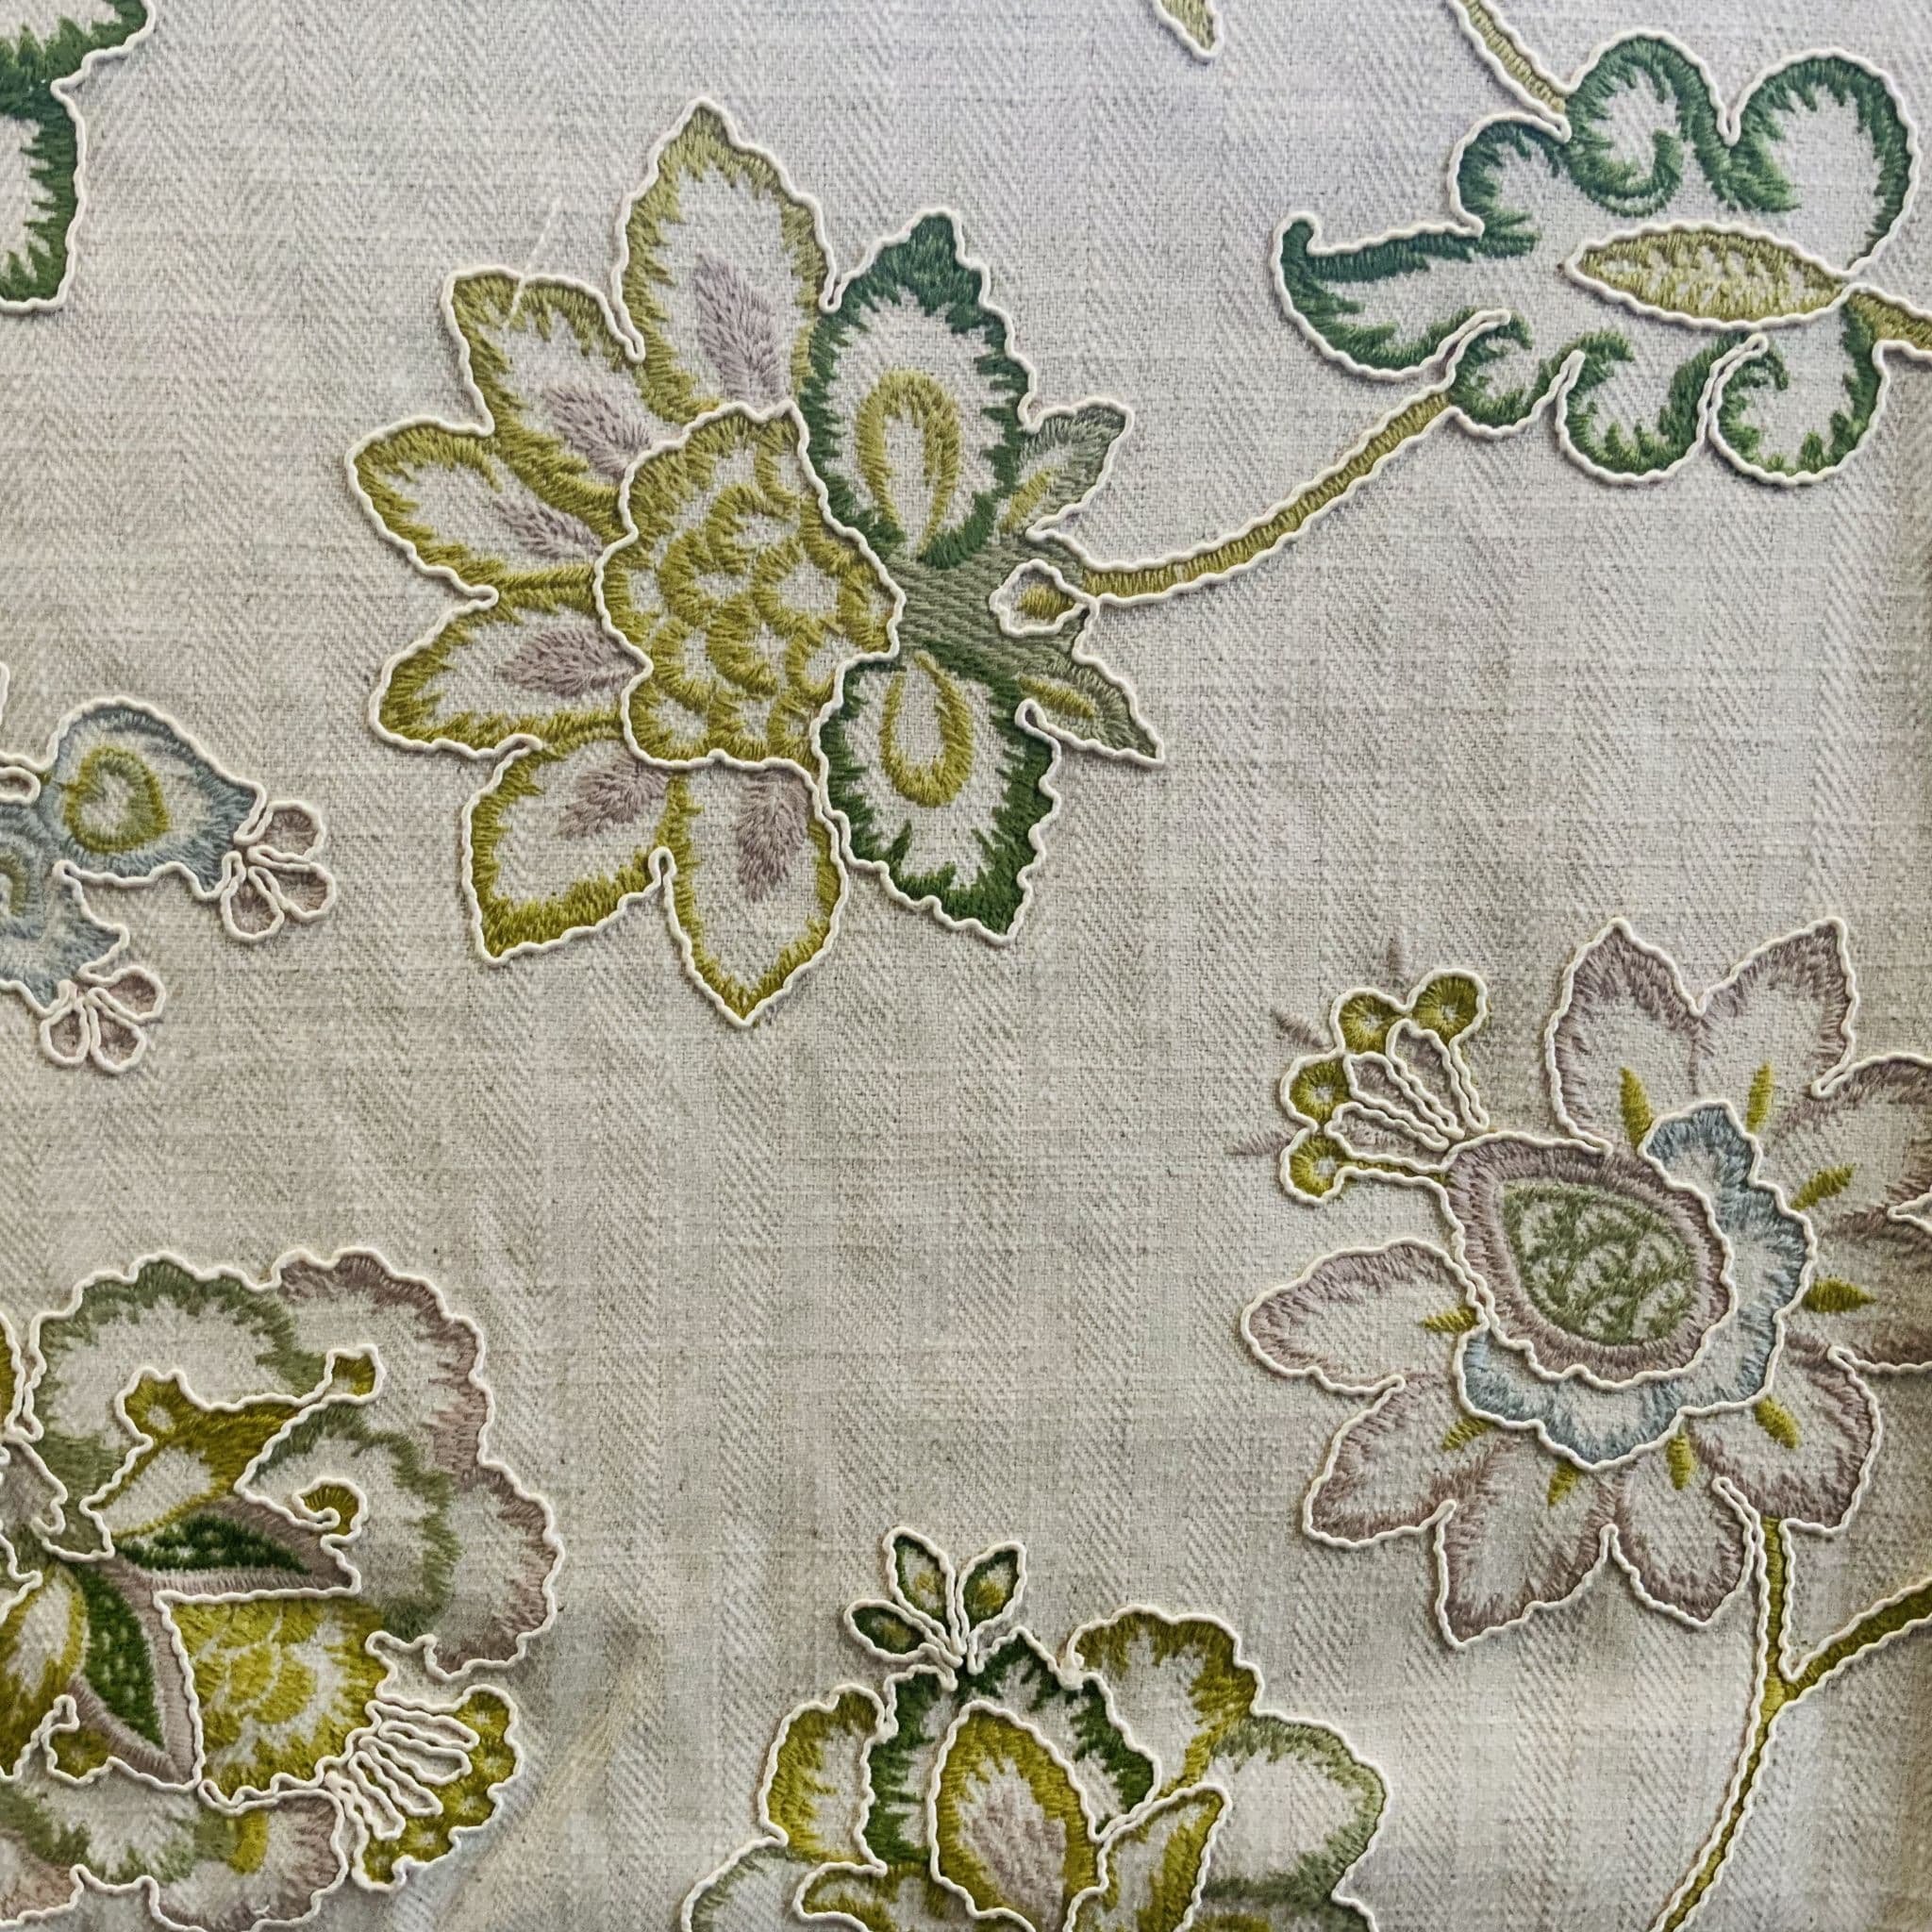 Prestigious Tiverton Embroidered Fabric in Willow. 1.4 mts